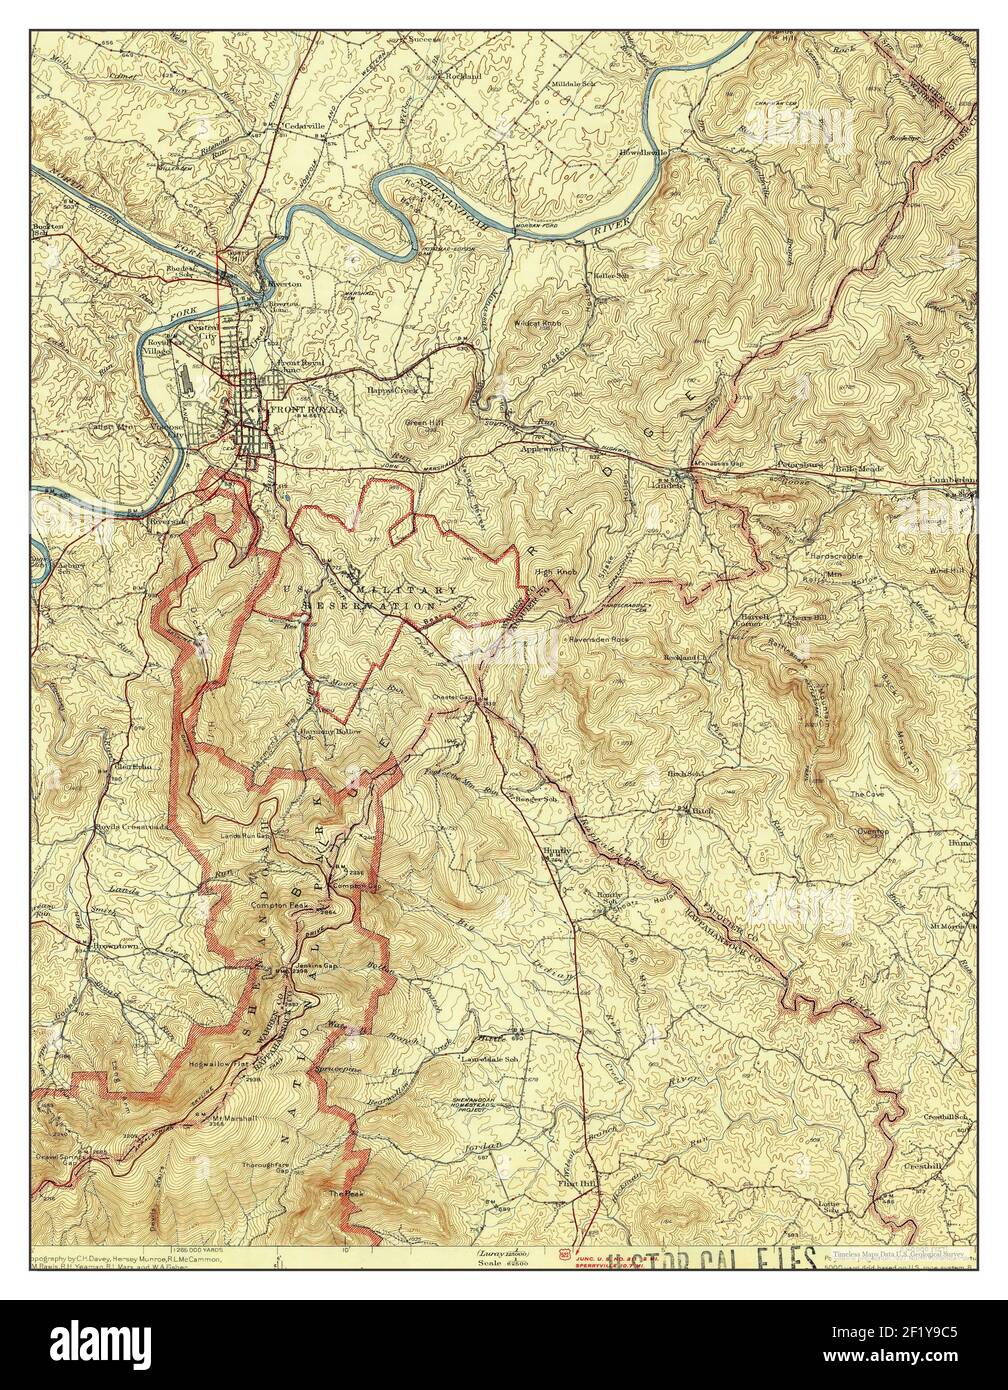 Front Royal, Virginia, map 1944, 1:62500, United States of America by Timeless Maps, data U.S. Geological Survey Stock Photo